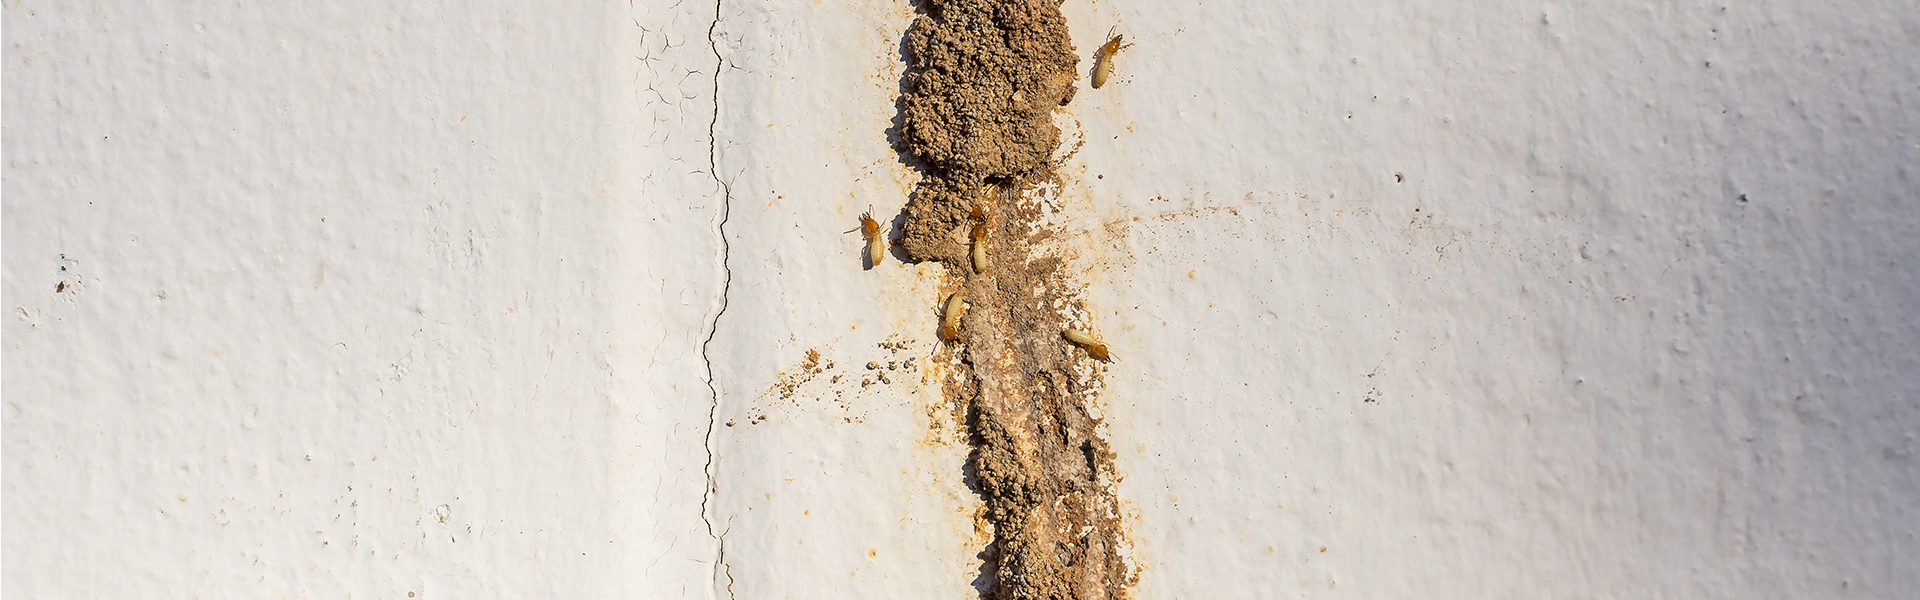 5 Signs Your House May Have Termites, Signs Of Termites In Kitchen Cabinets